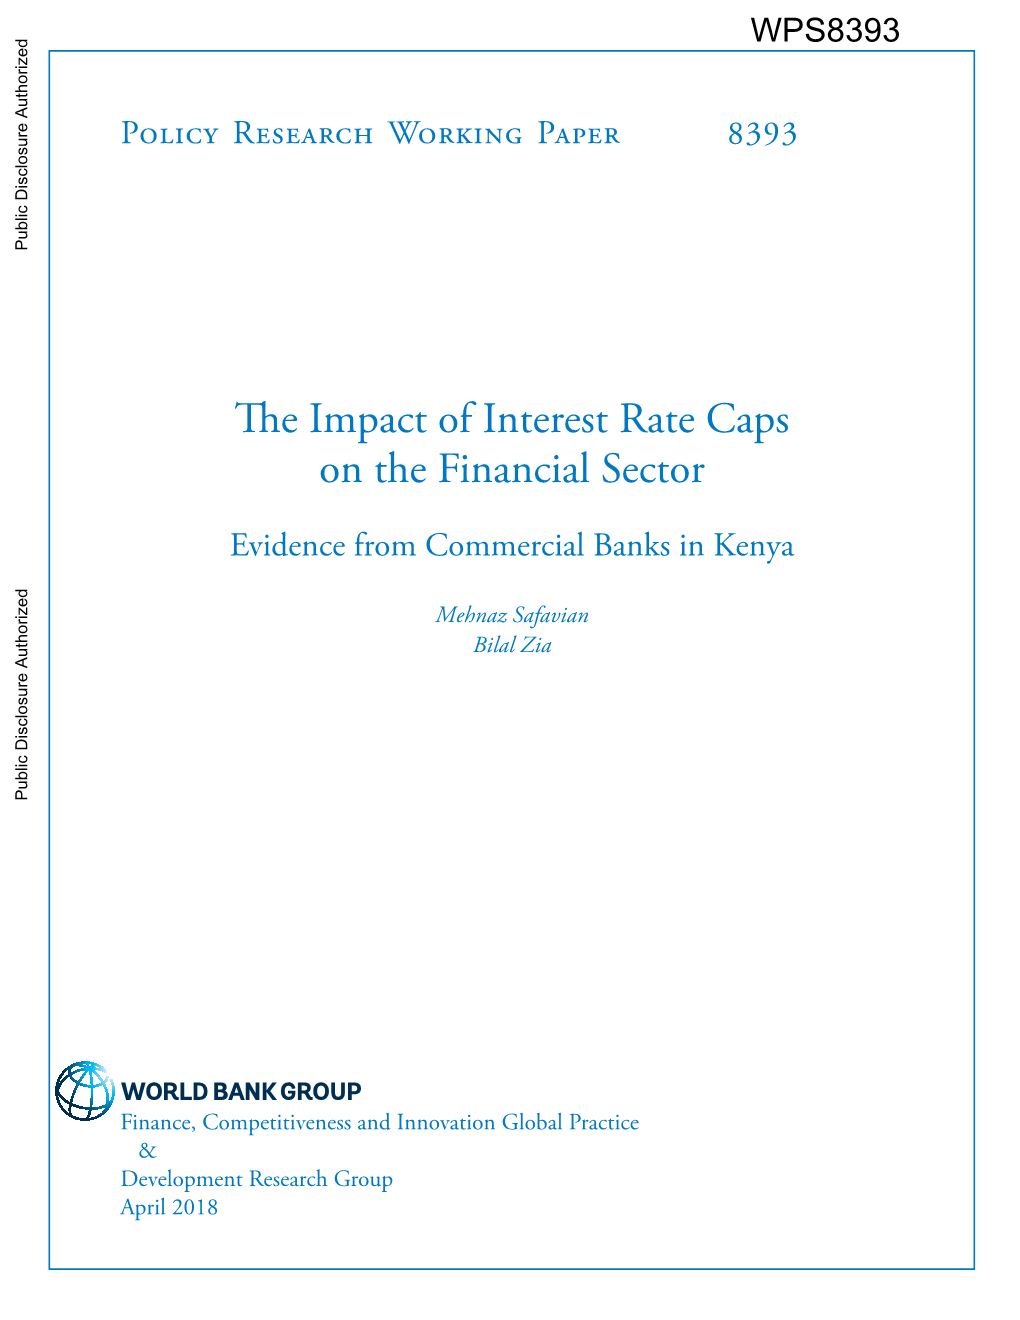 The Impact of Interest Rate Caps on the Financial Sector